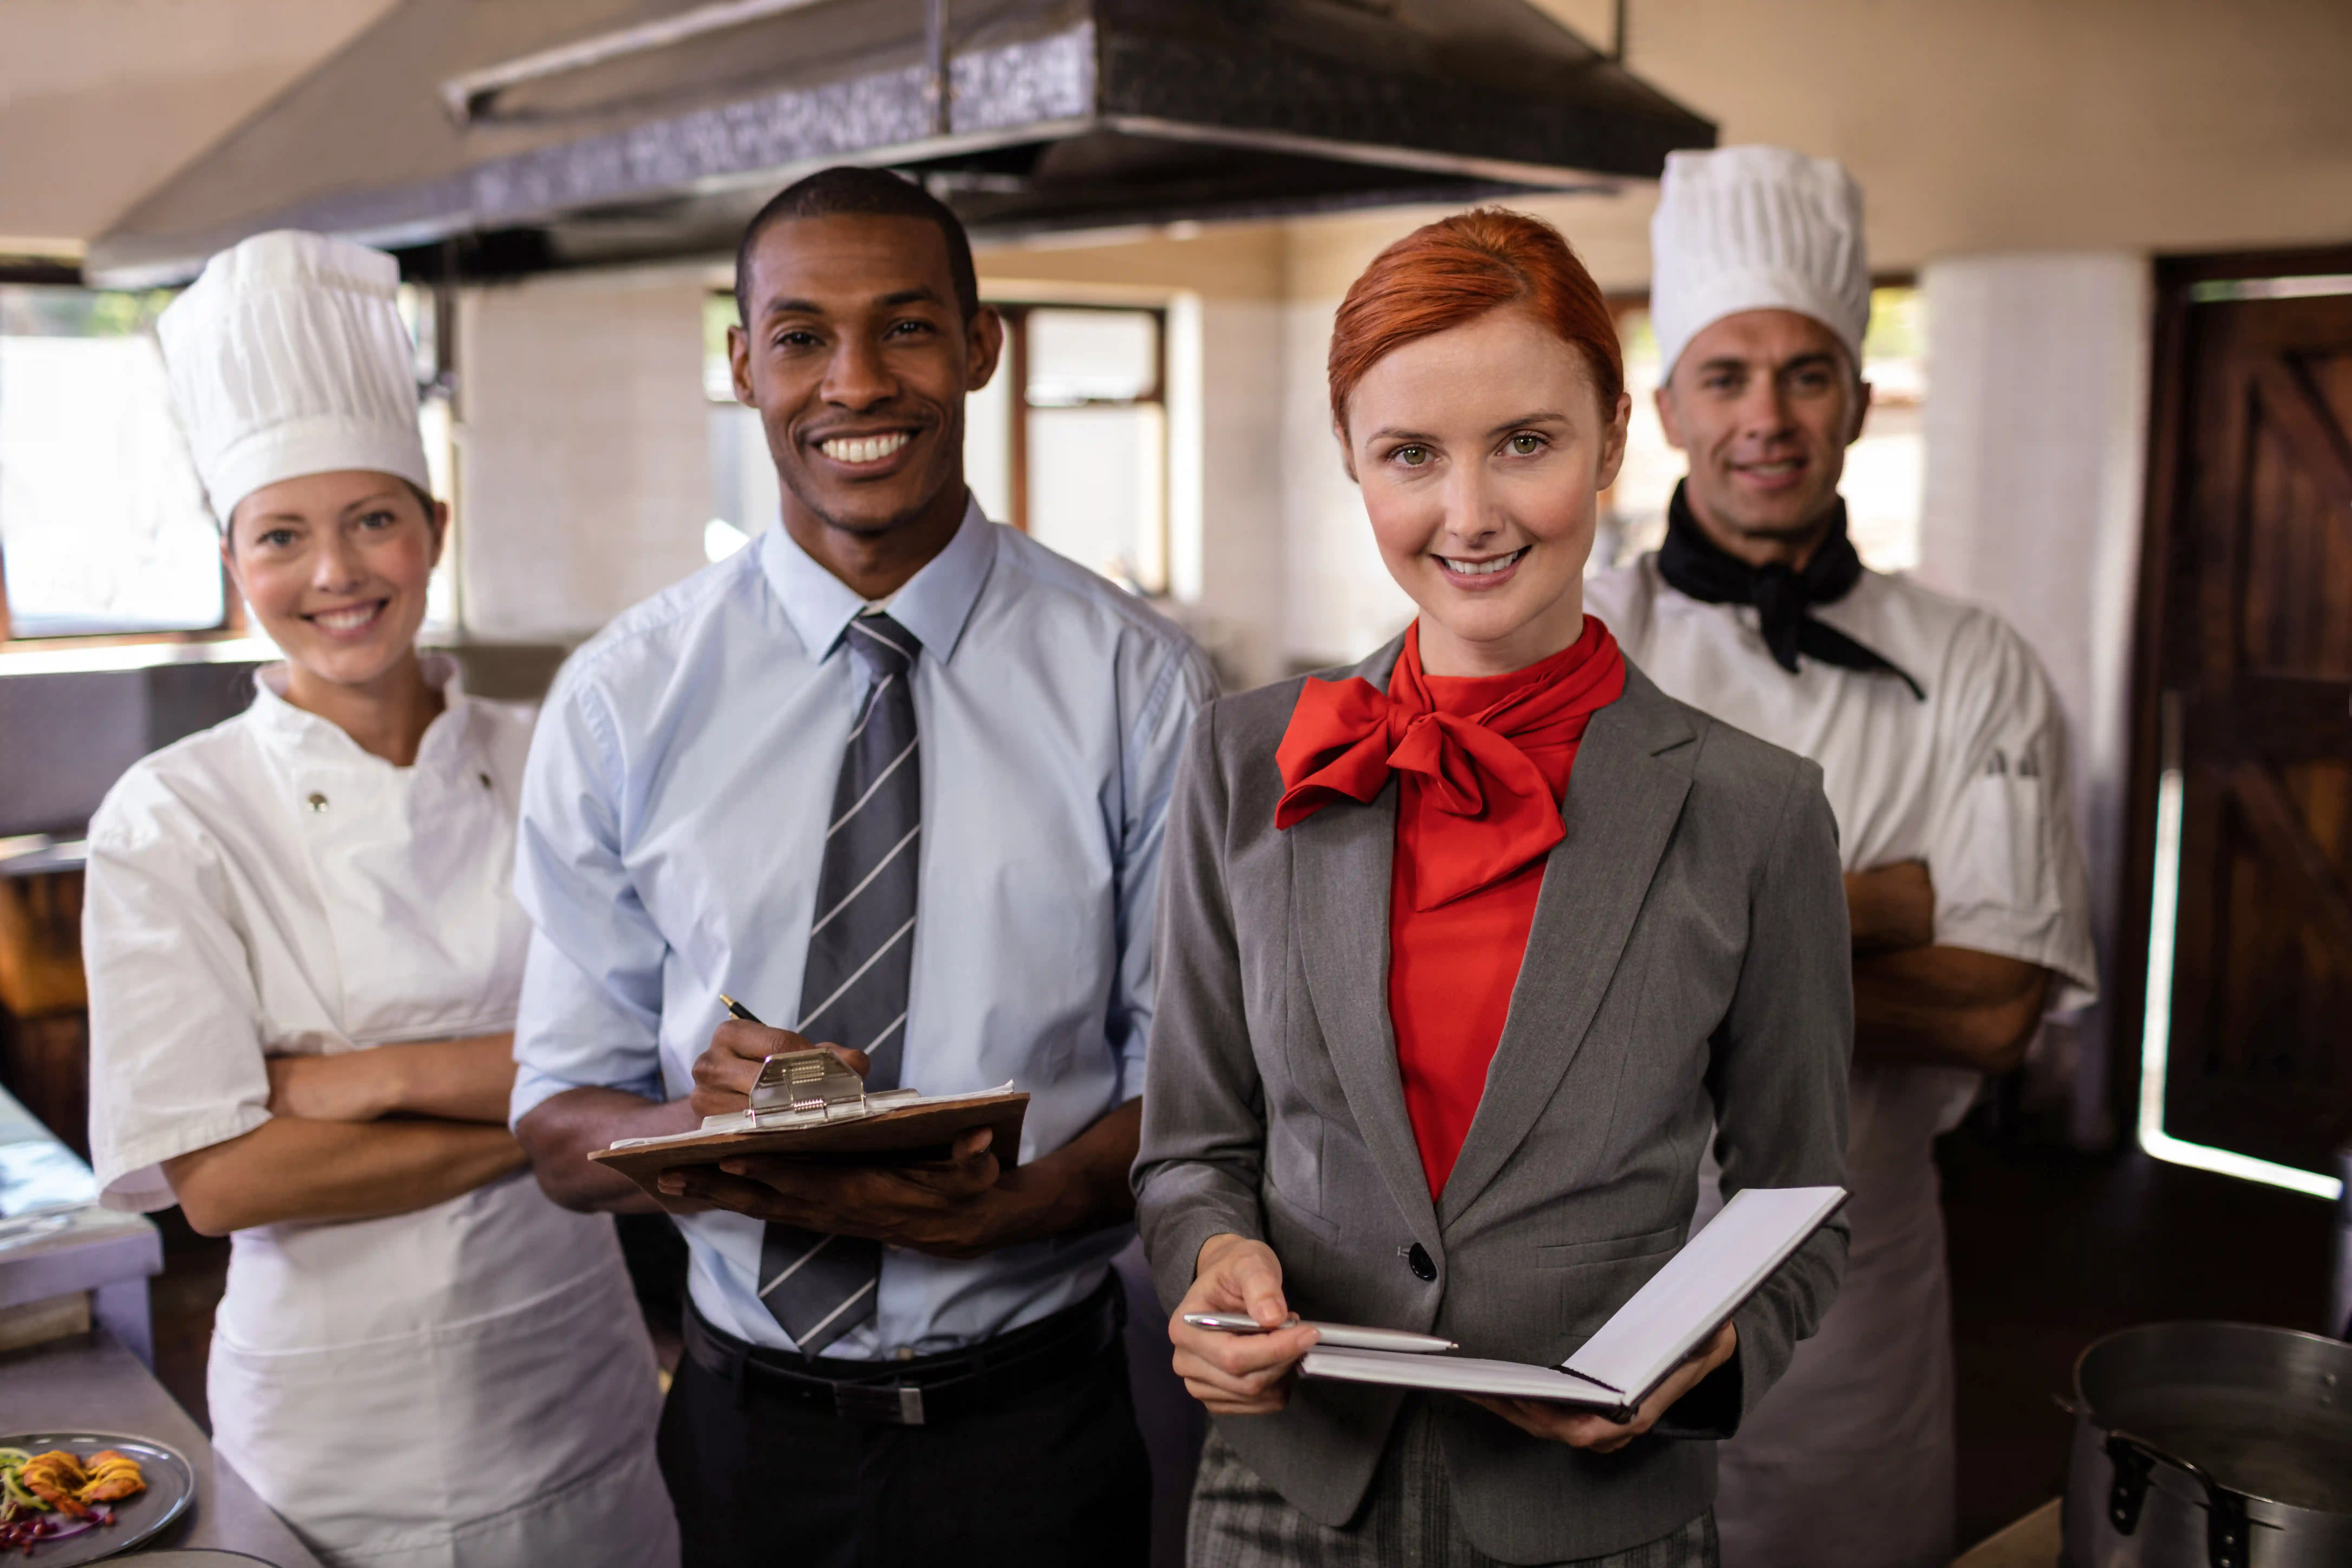 IHM - Are Hospitality Management courses worth it?